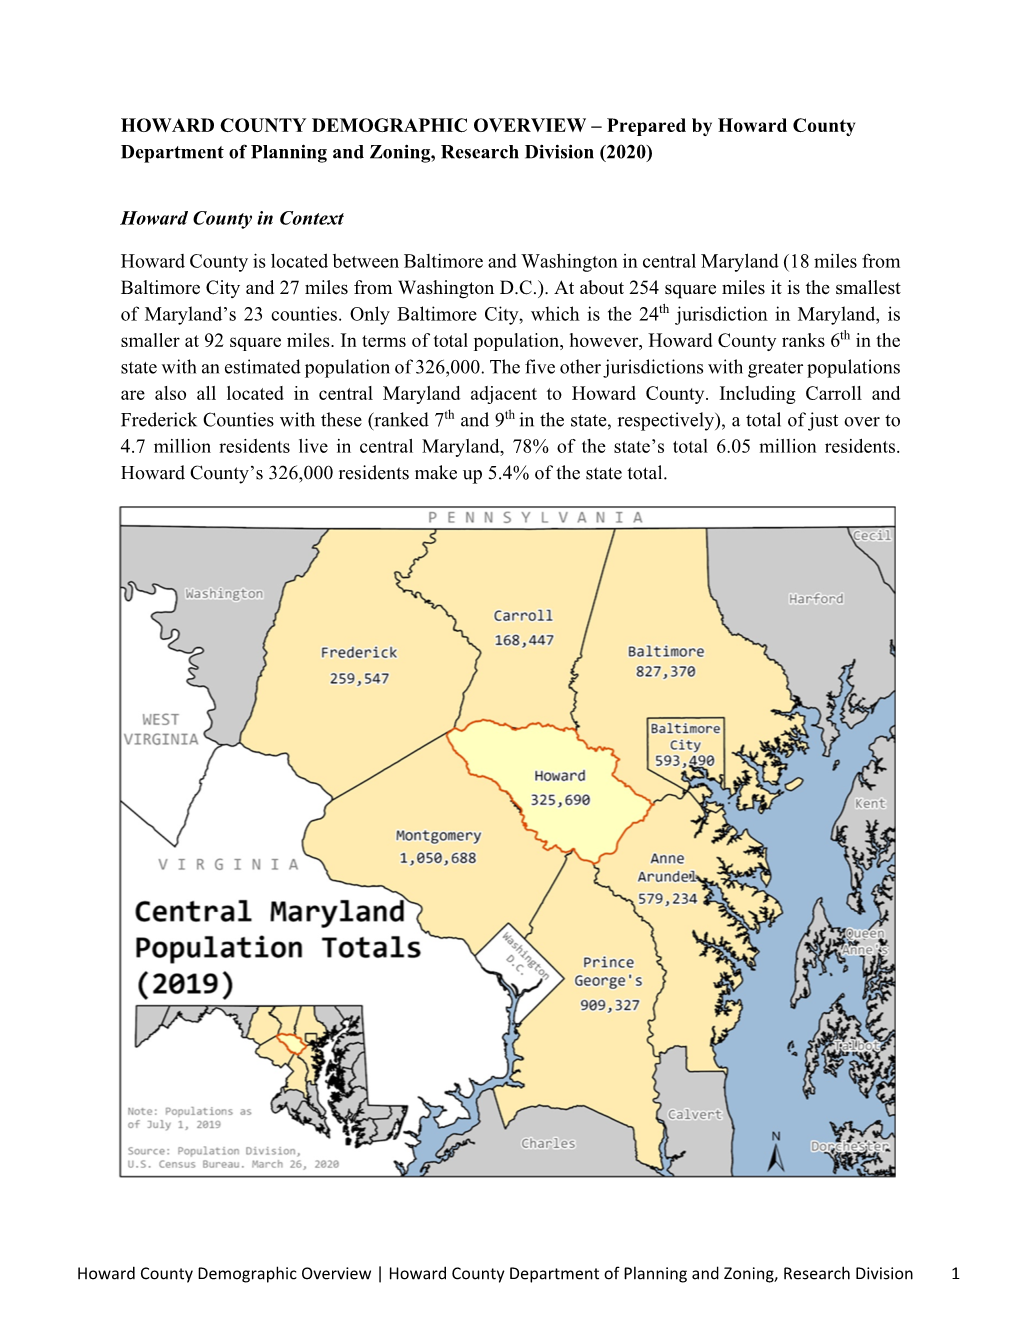 HOWARD COUNTY DEMOGRAPHIC OVERVIEW – Prepared by Howard County Department of Planning and Zoning, Research Division (2020)